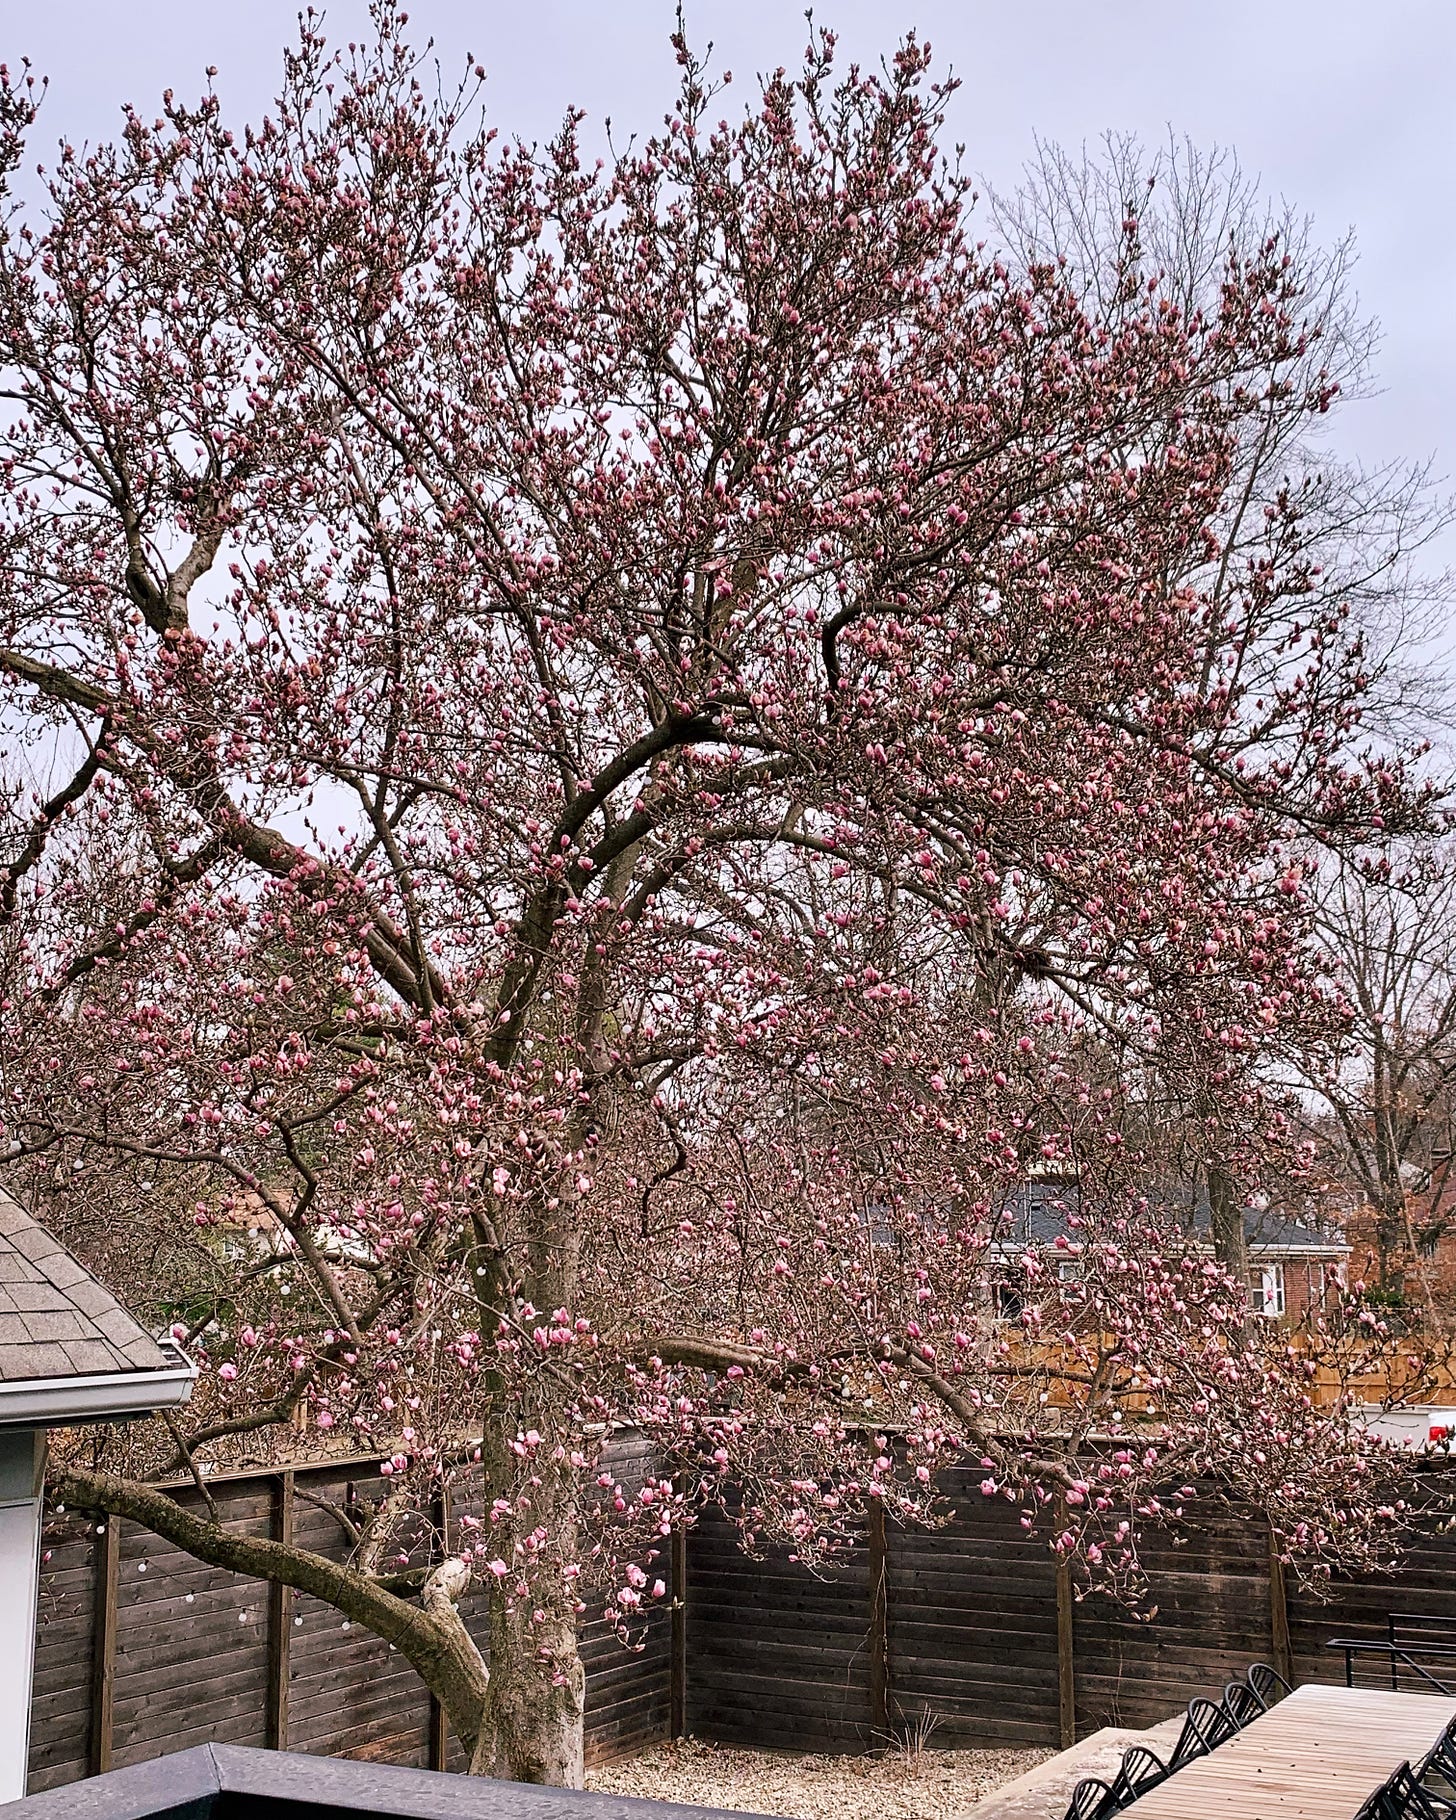 a large magnolia with budding pink blossoms in front of a grey-blue sky